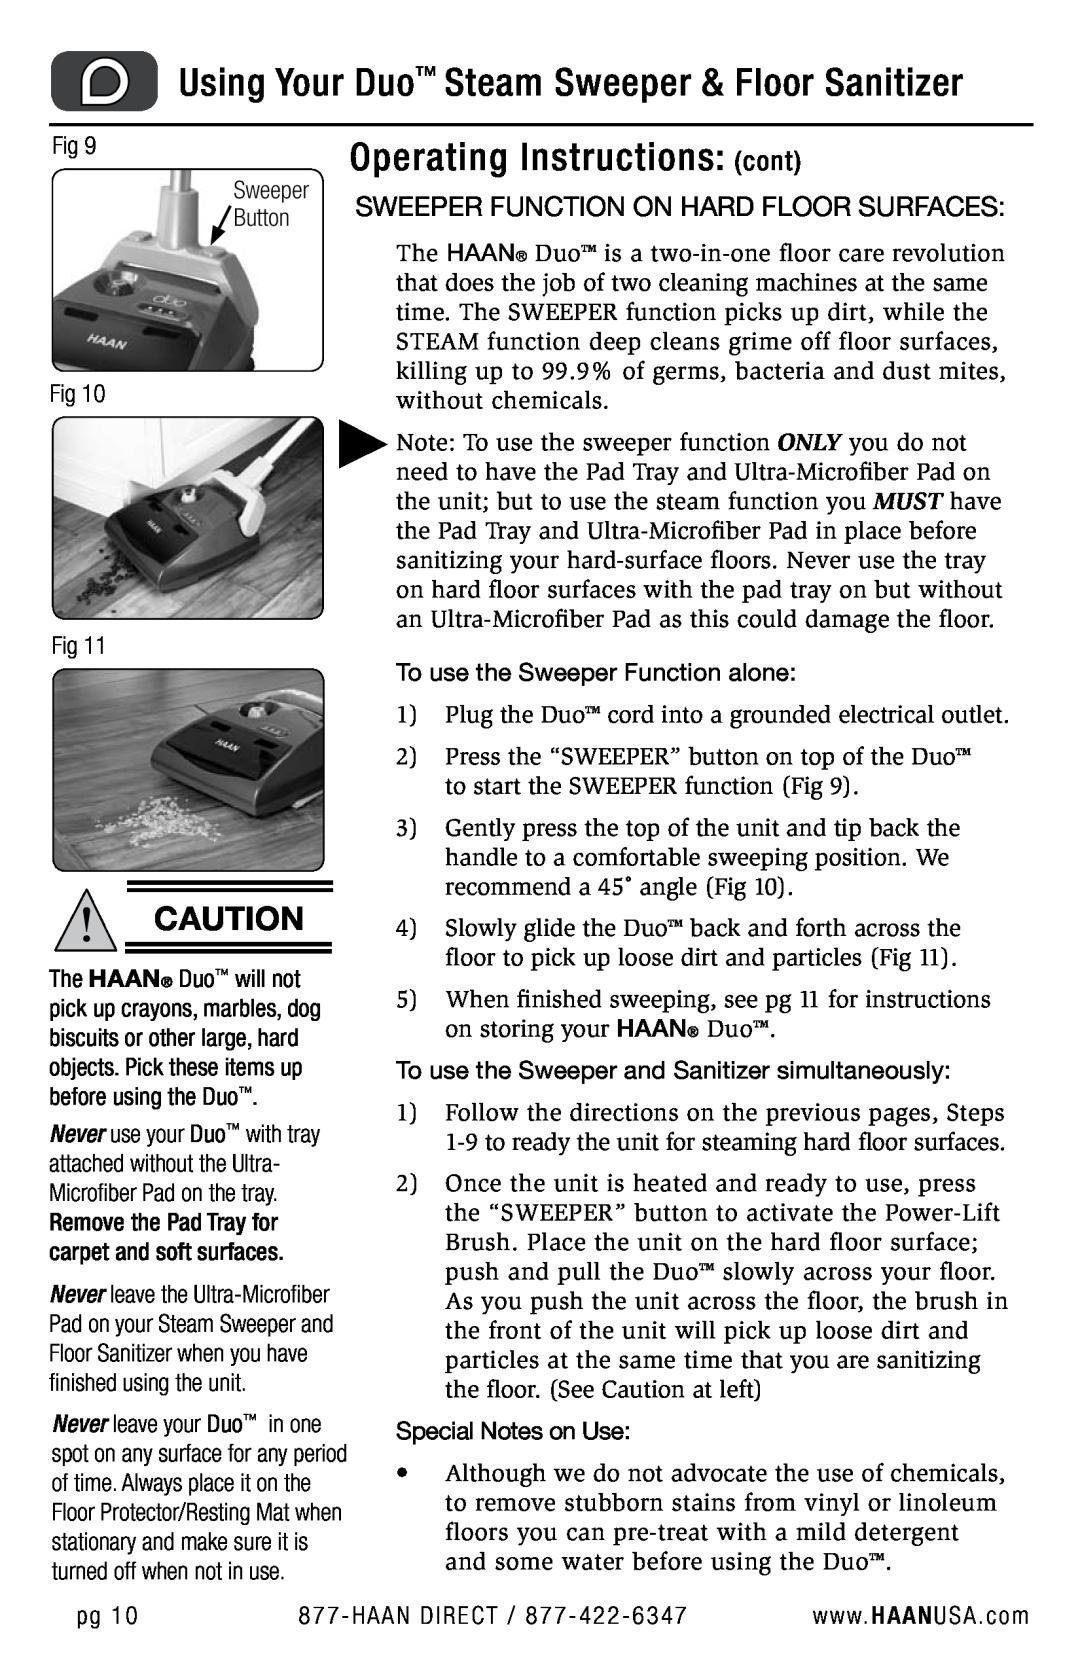 Haan HD-50 user manual Operating Instructions cont, Using Your Duo Steam Sweeper & Floor Sanitizer 